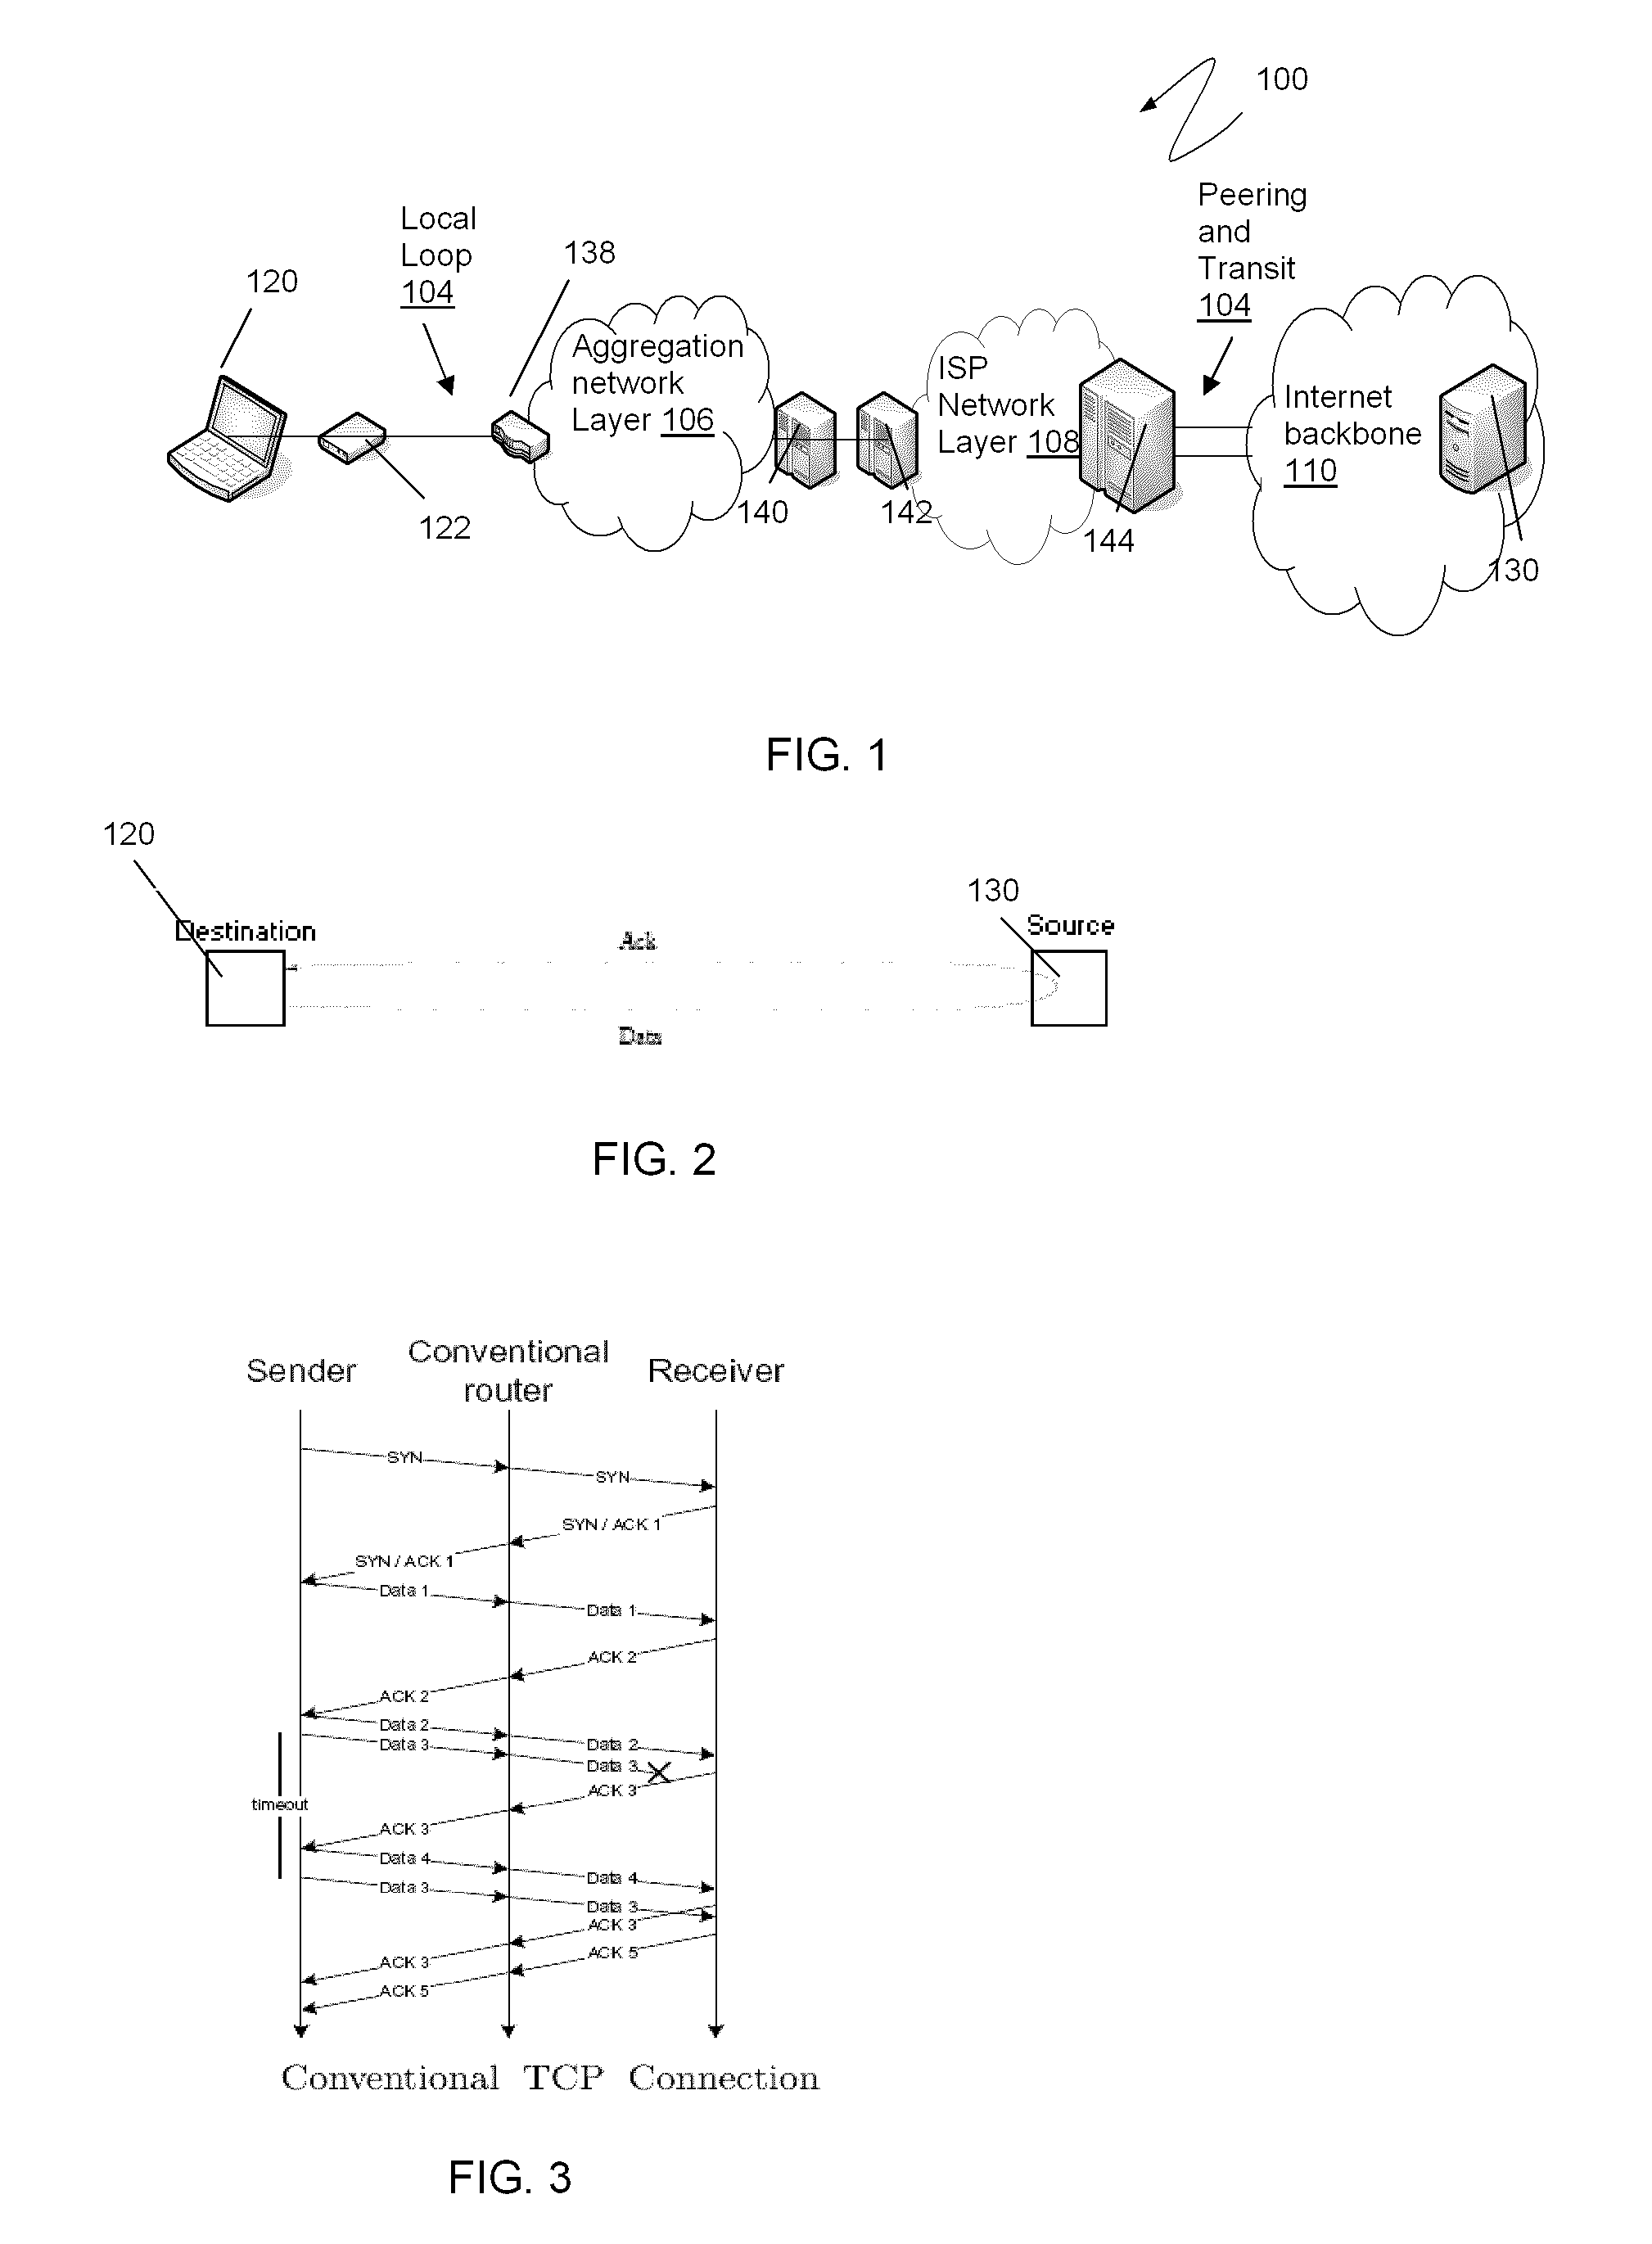 Method and system for increasing performance of transmission control protocol sessions in data networks